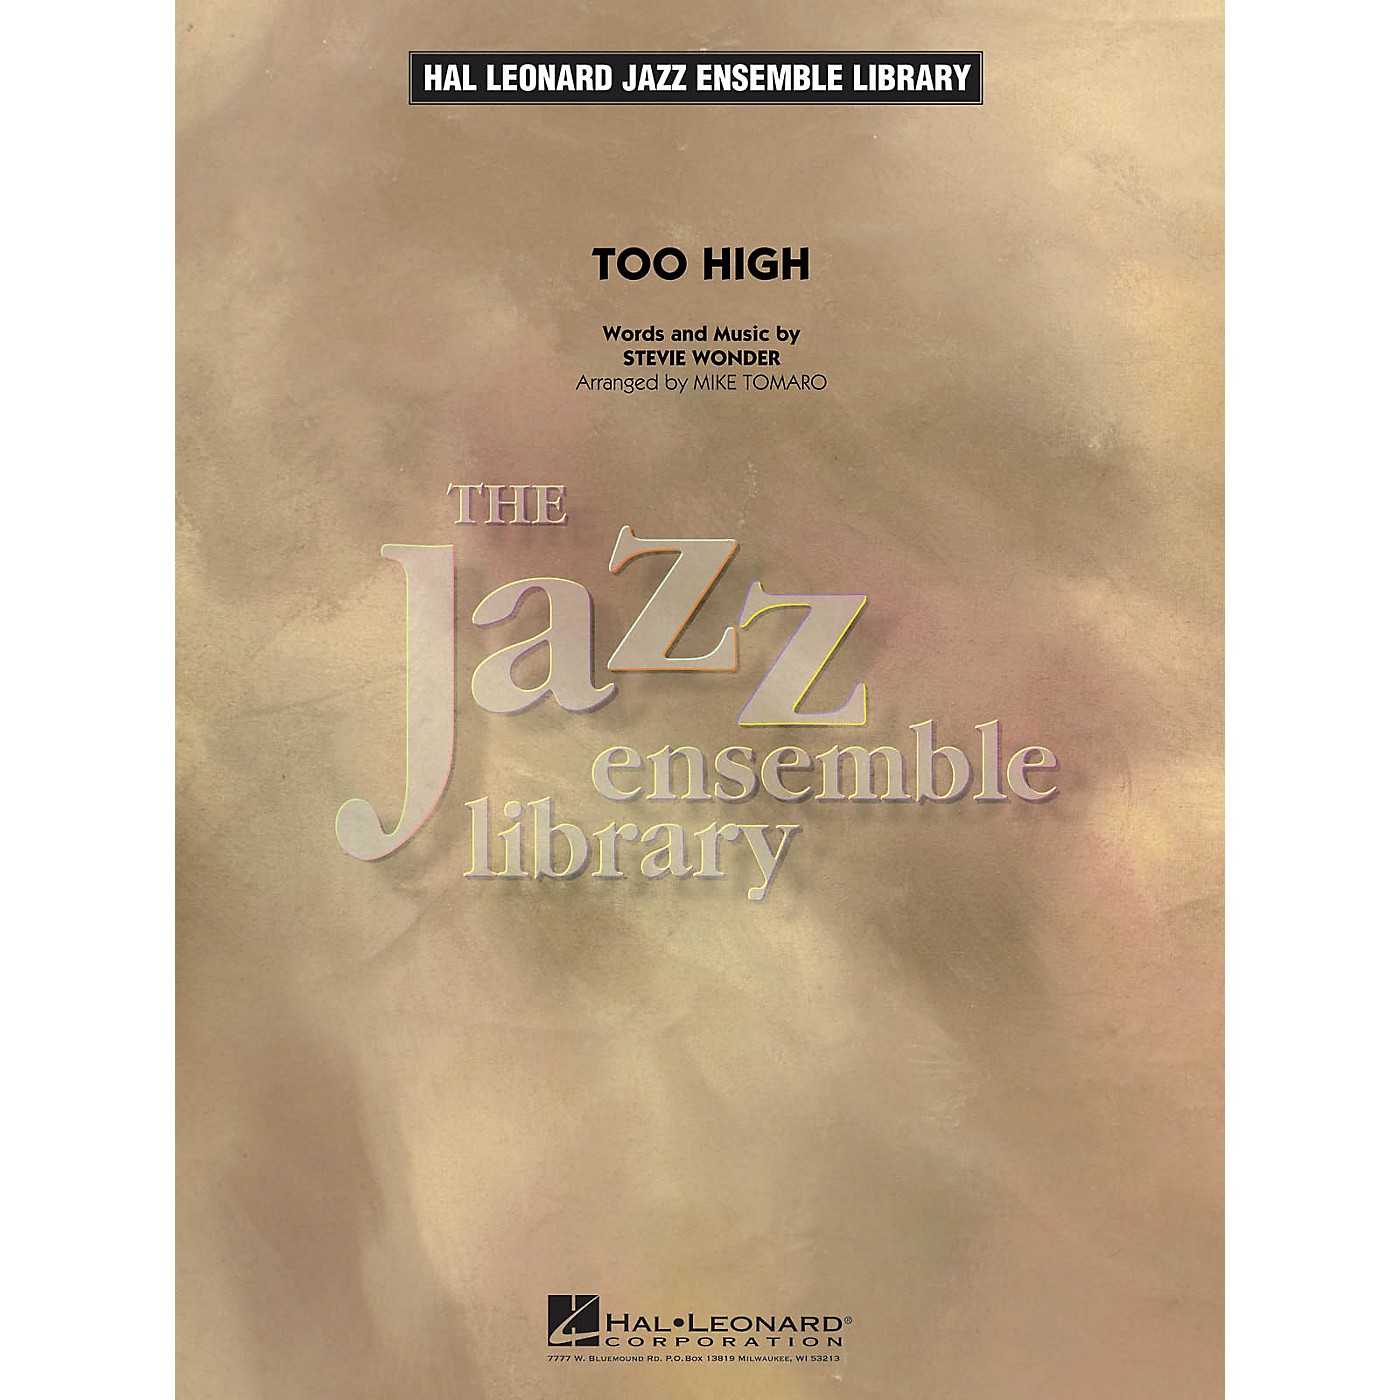 Hal Leonard Too High Jazz Band Level 4 by Stevie Wonder Arranged by Mike Tomaro thumbnail